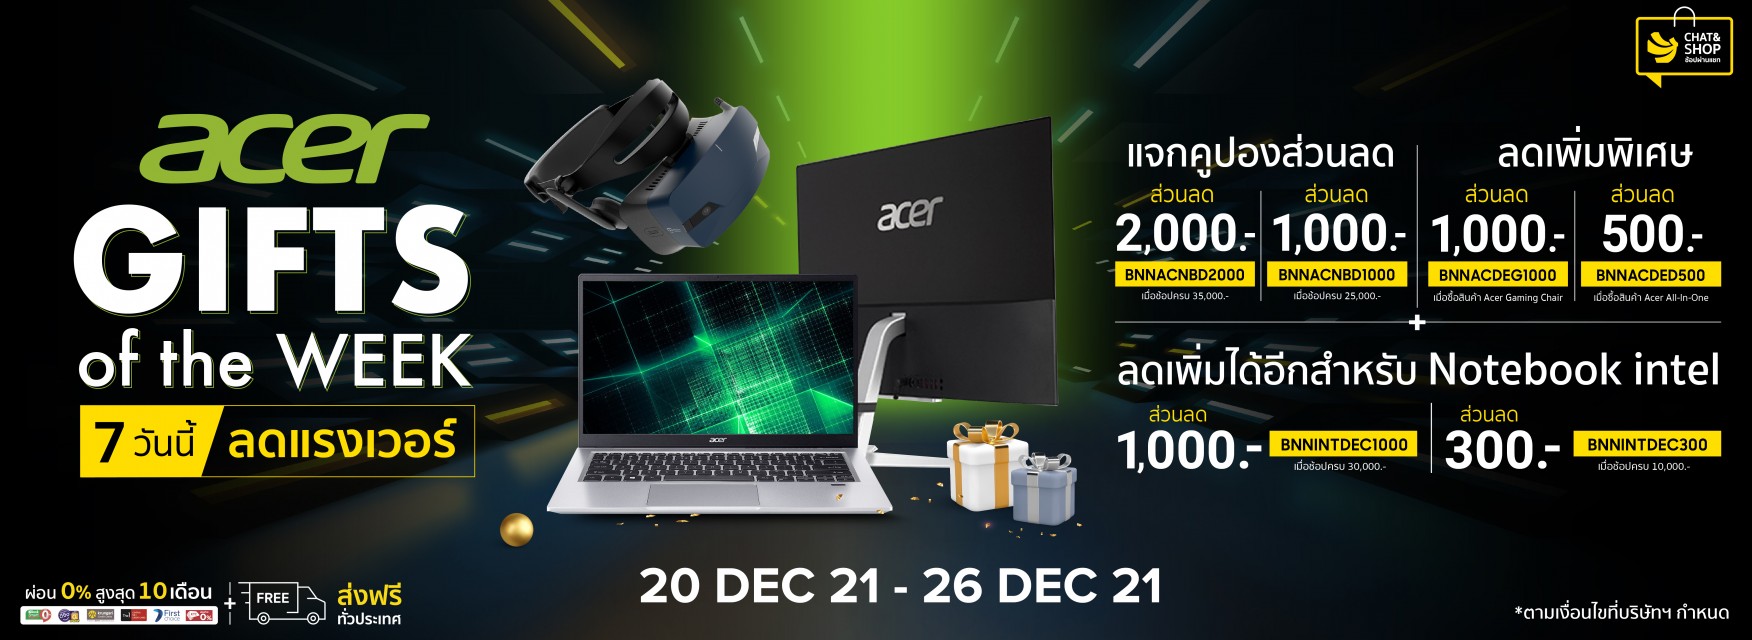 Acer Gift of the Week